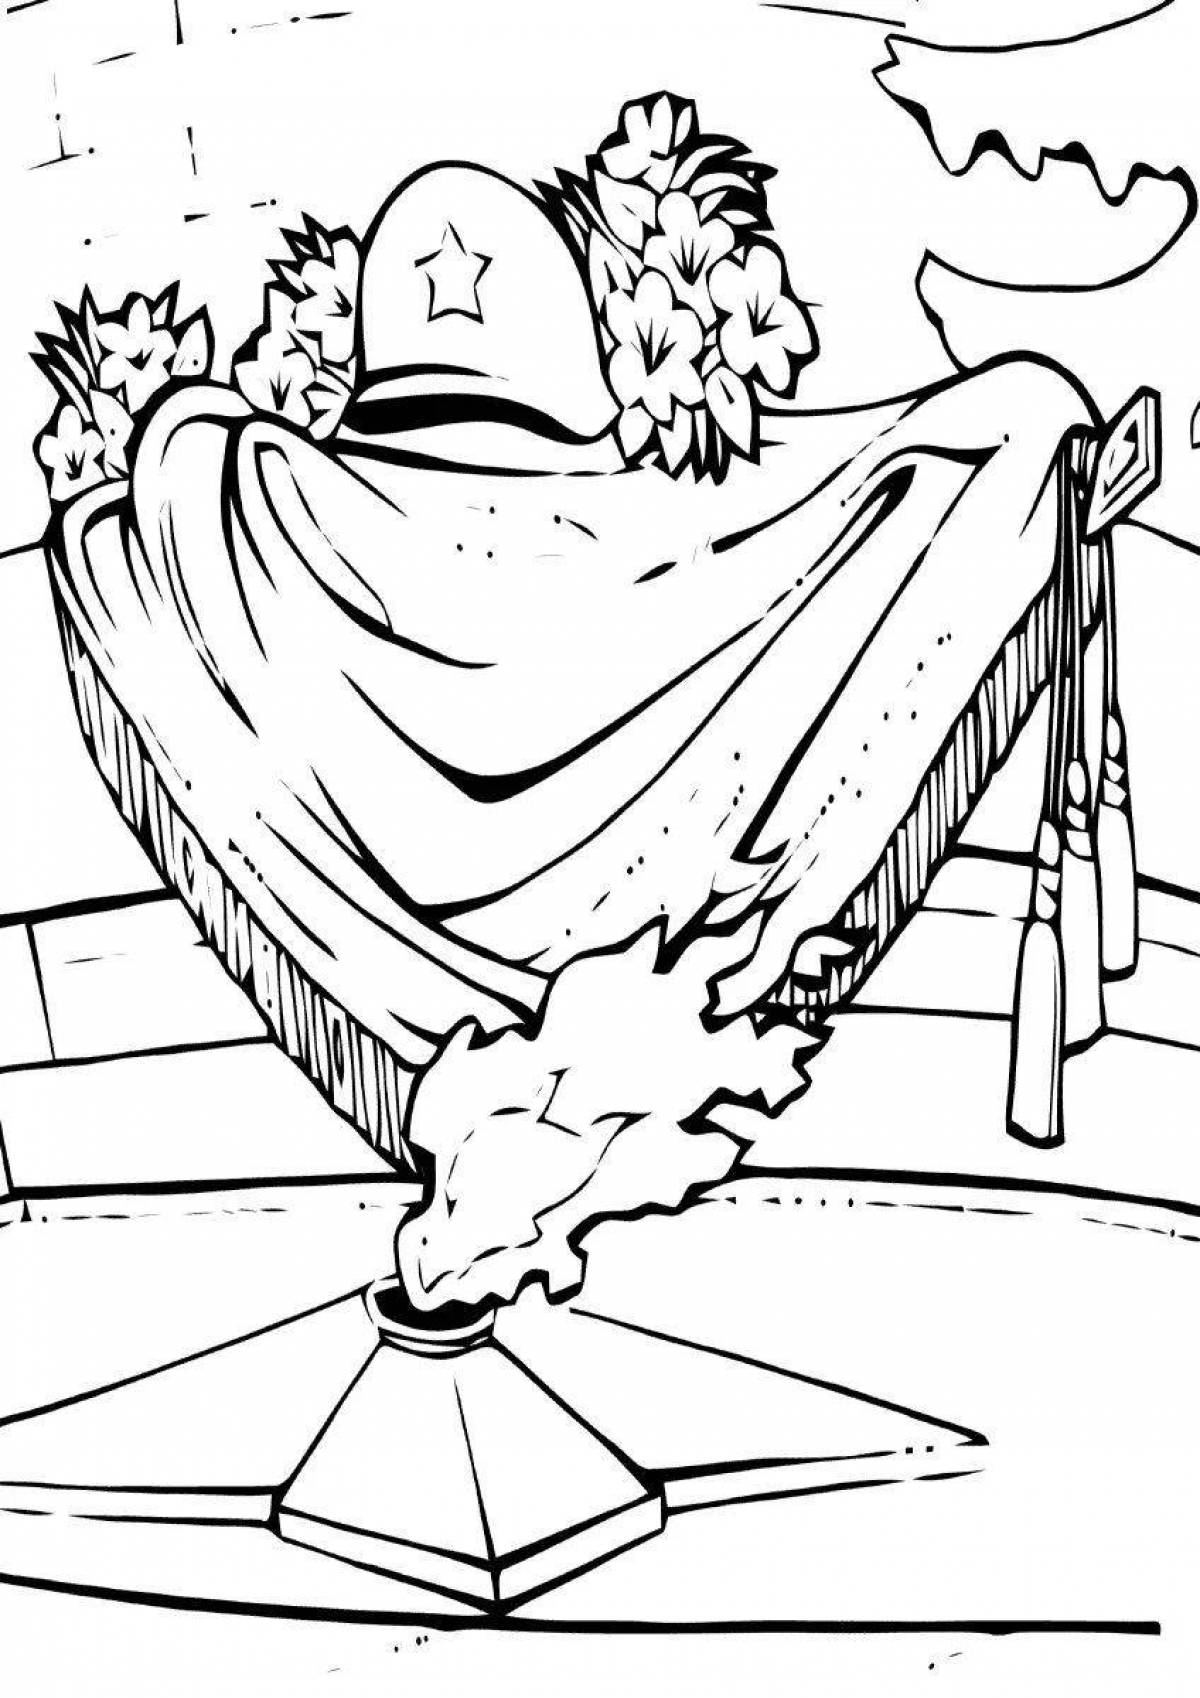 Dazzling Eternal Flame Coloring Page for 5-6 year olds